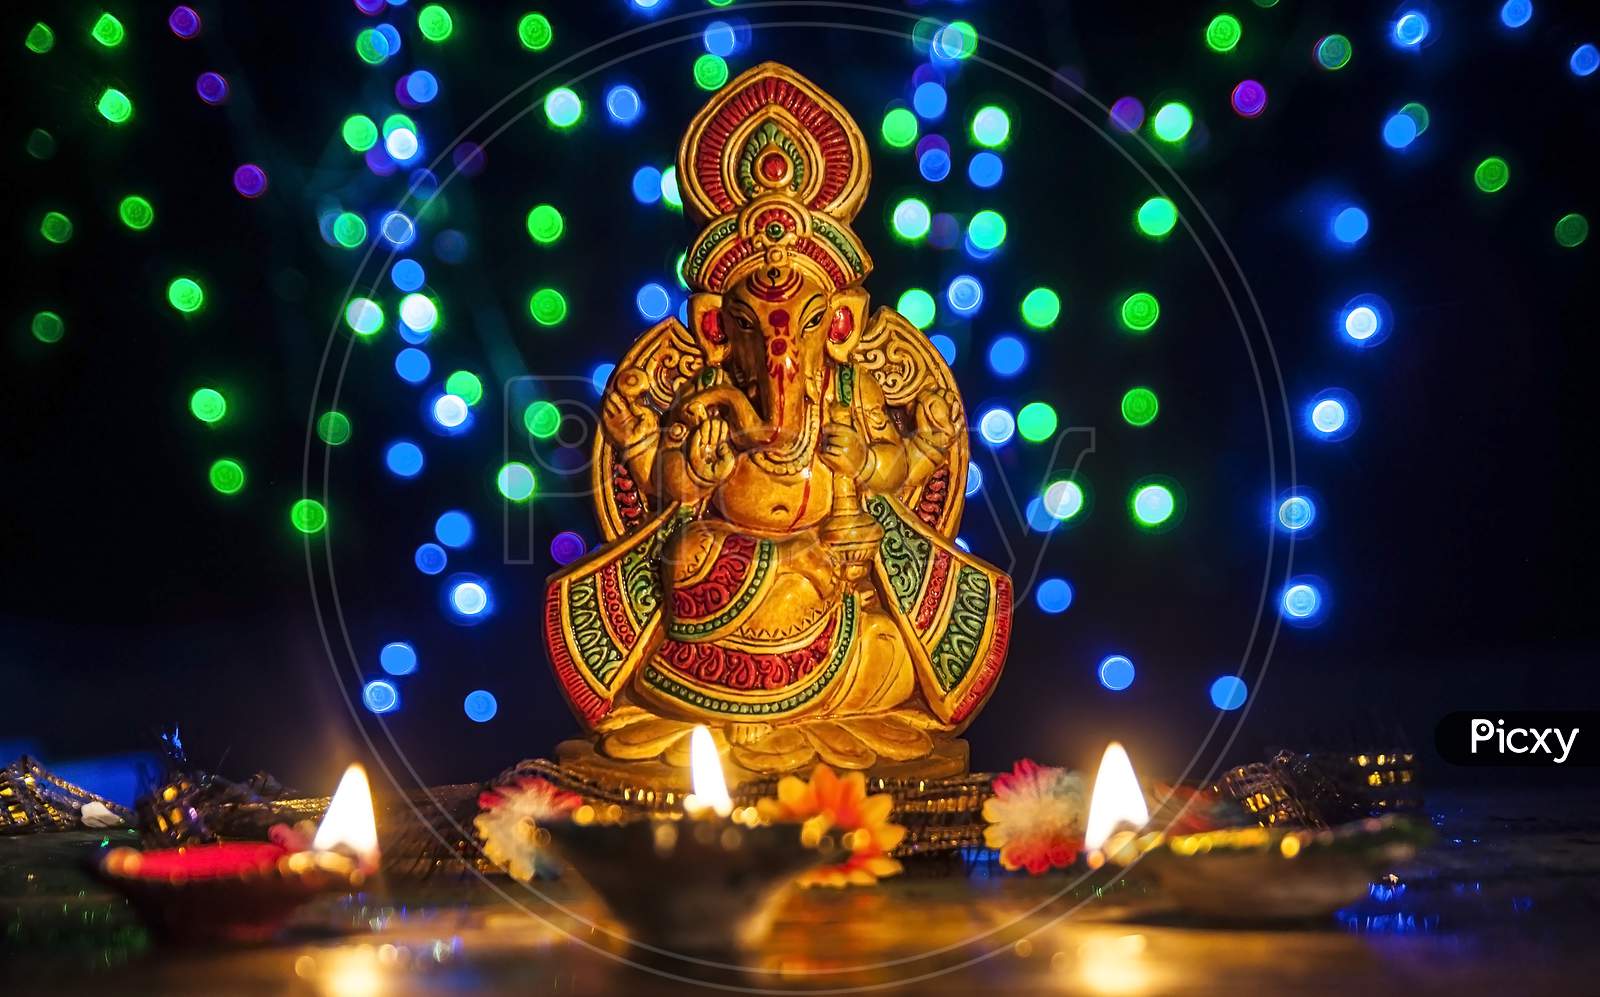 Lord Ganesha with multicolored lights.